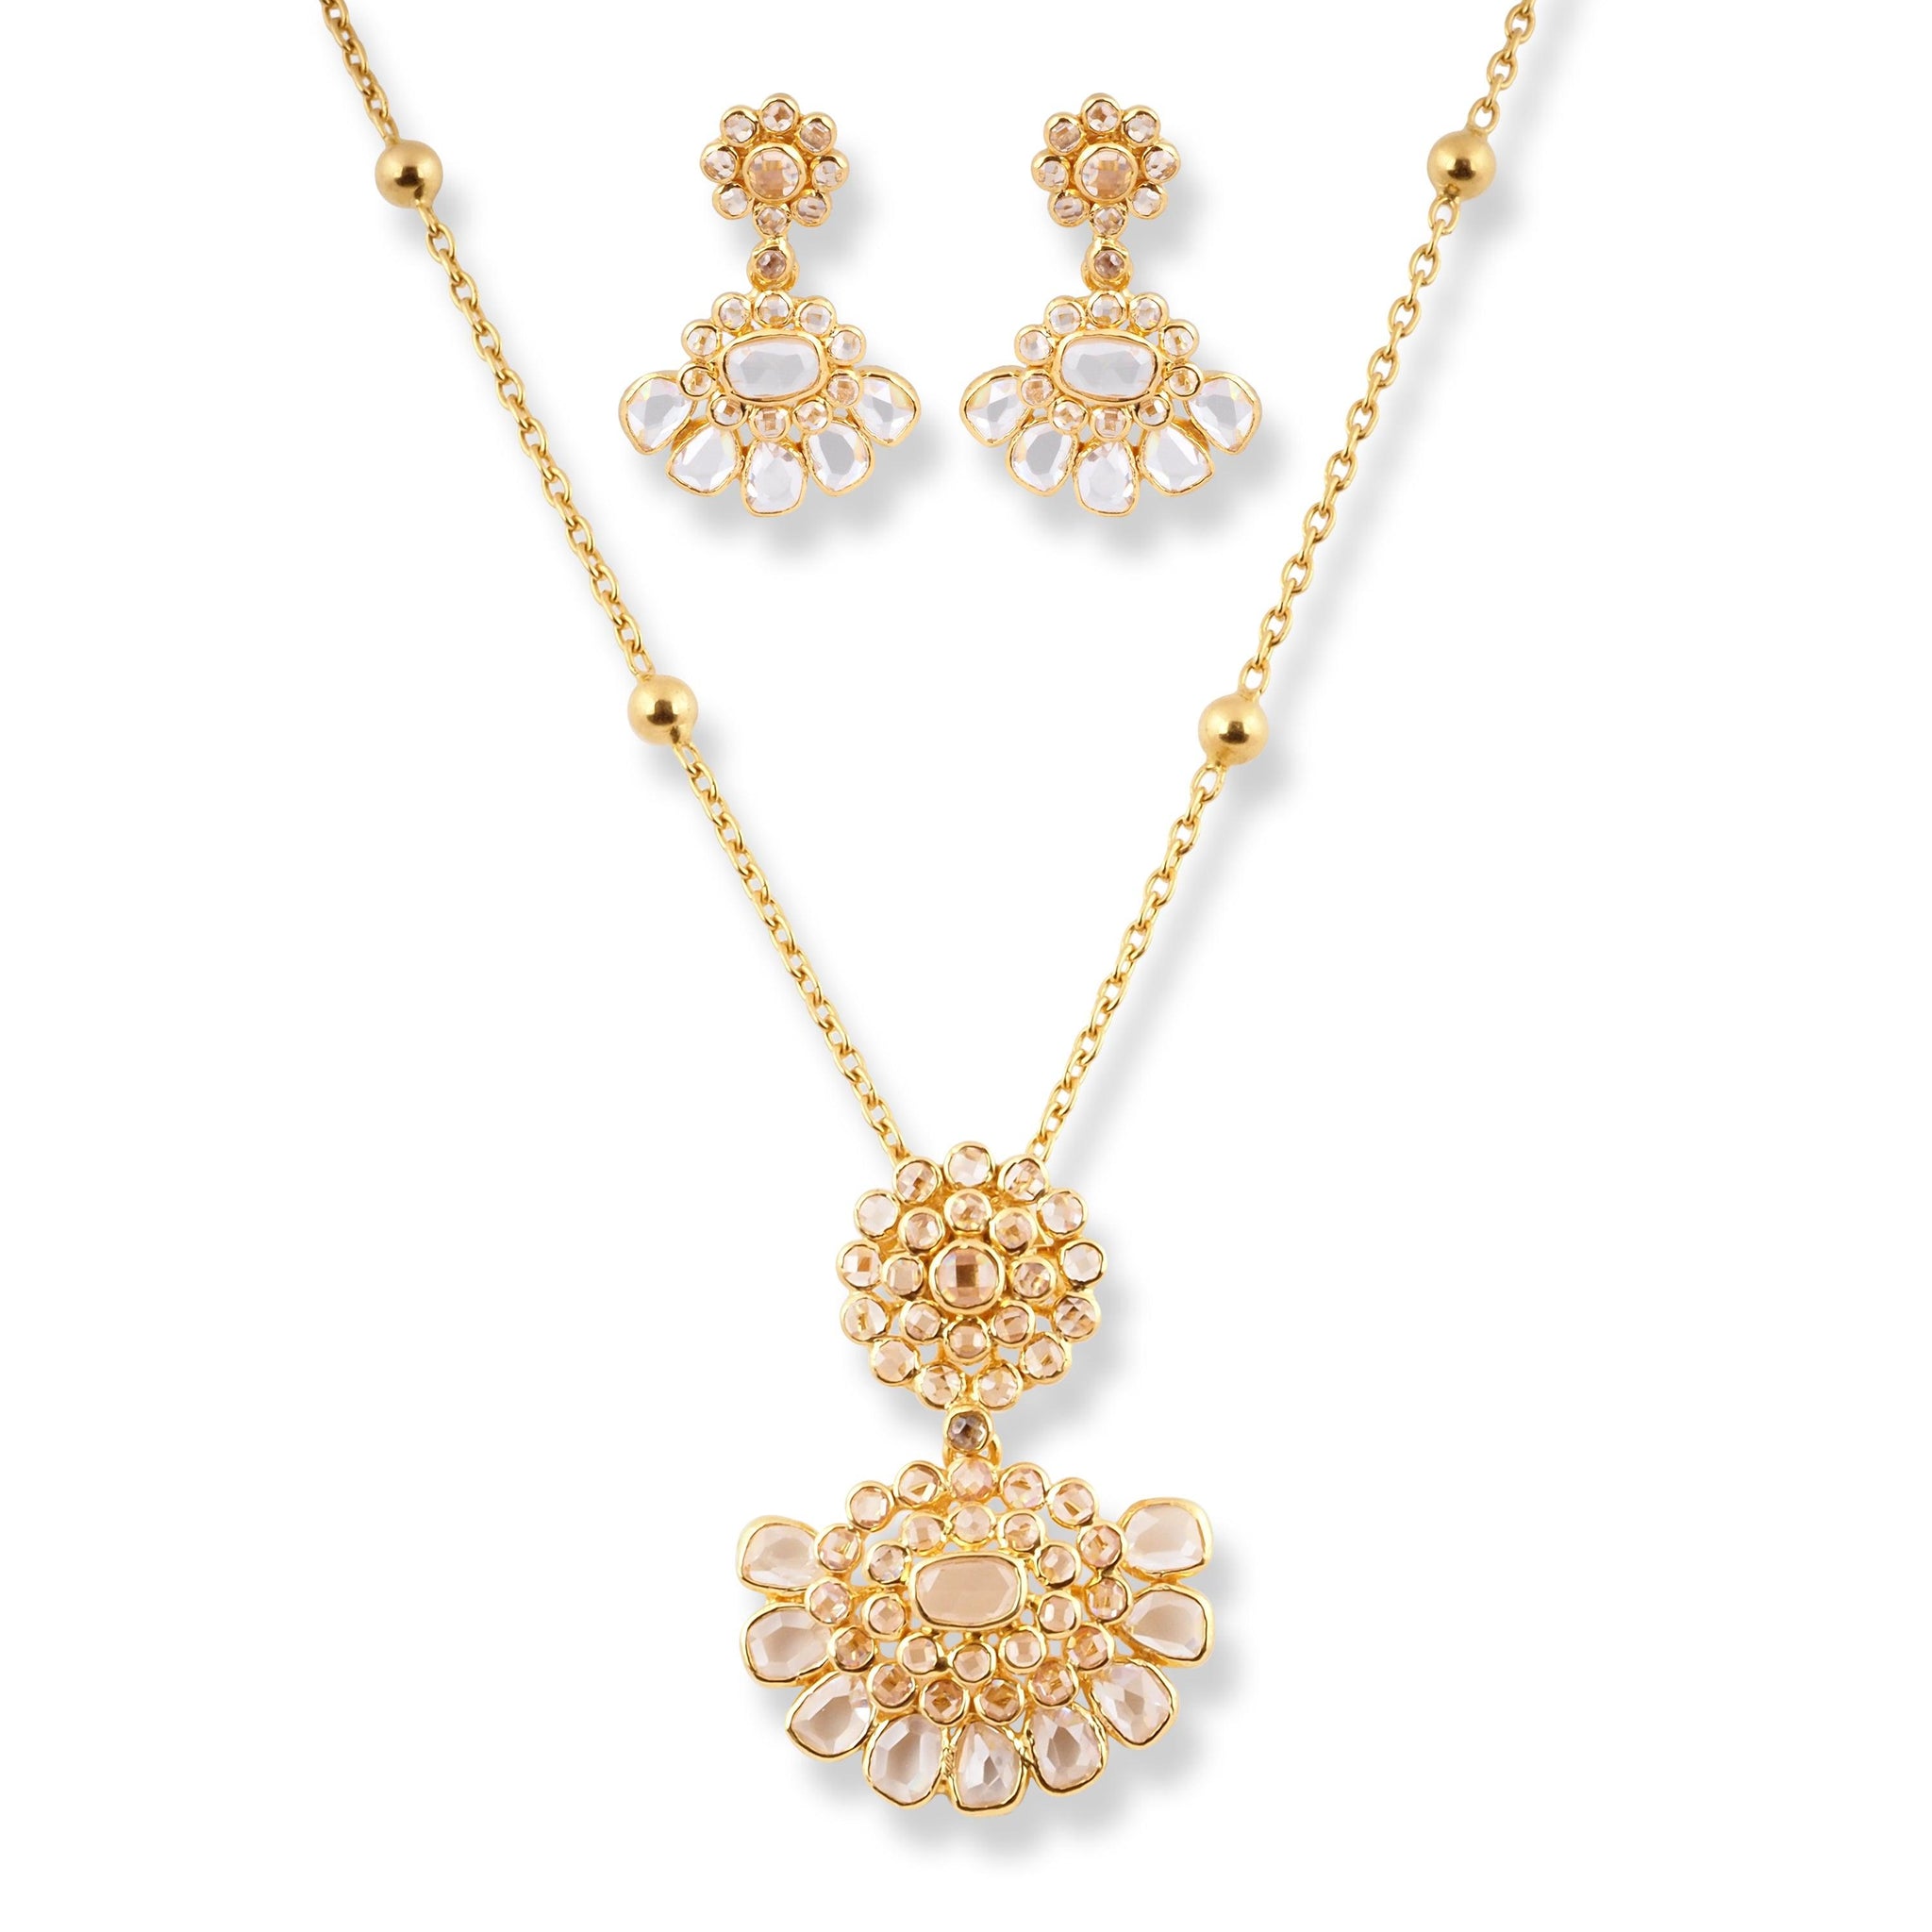 22ct Yellow Gold Necklace & Earrings with Polki Style Cubic Zirconia Stones.